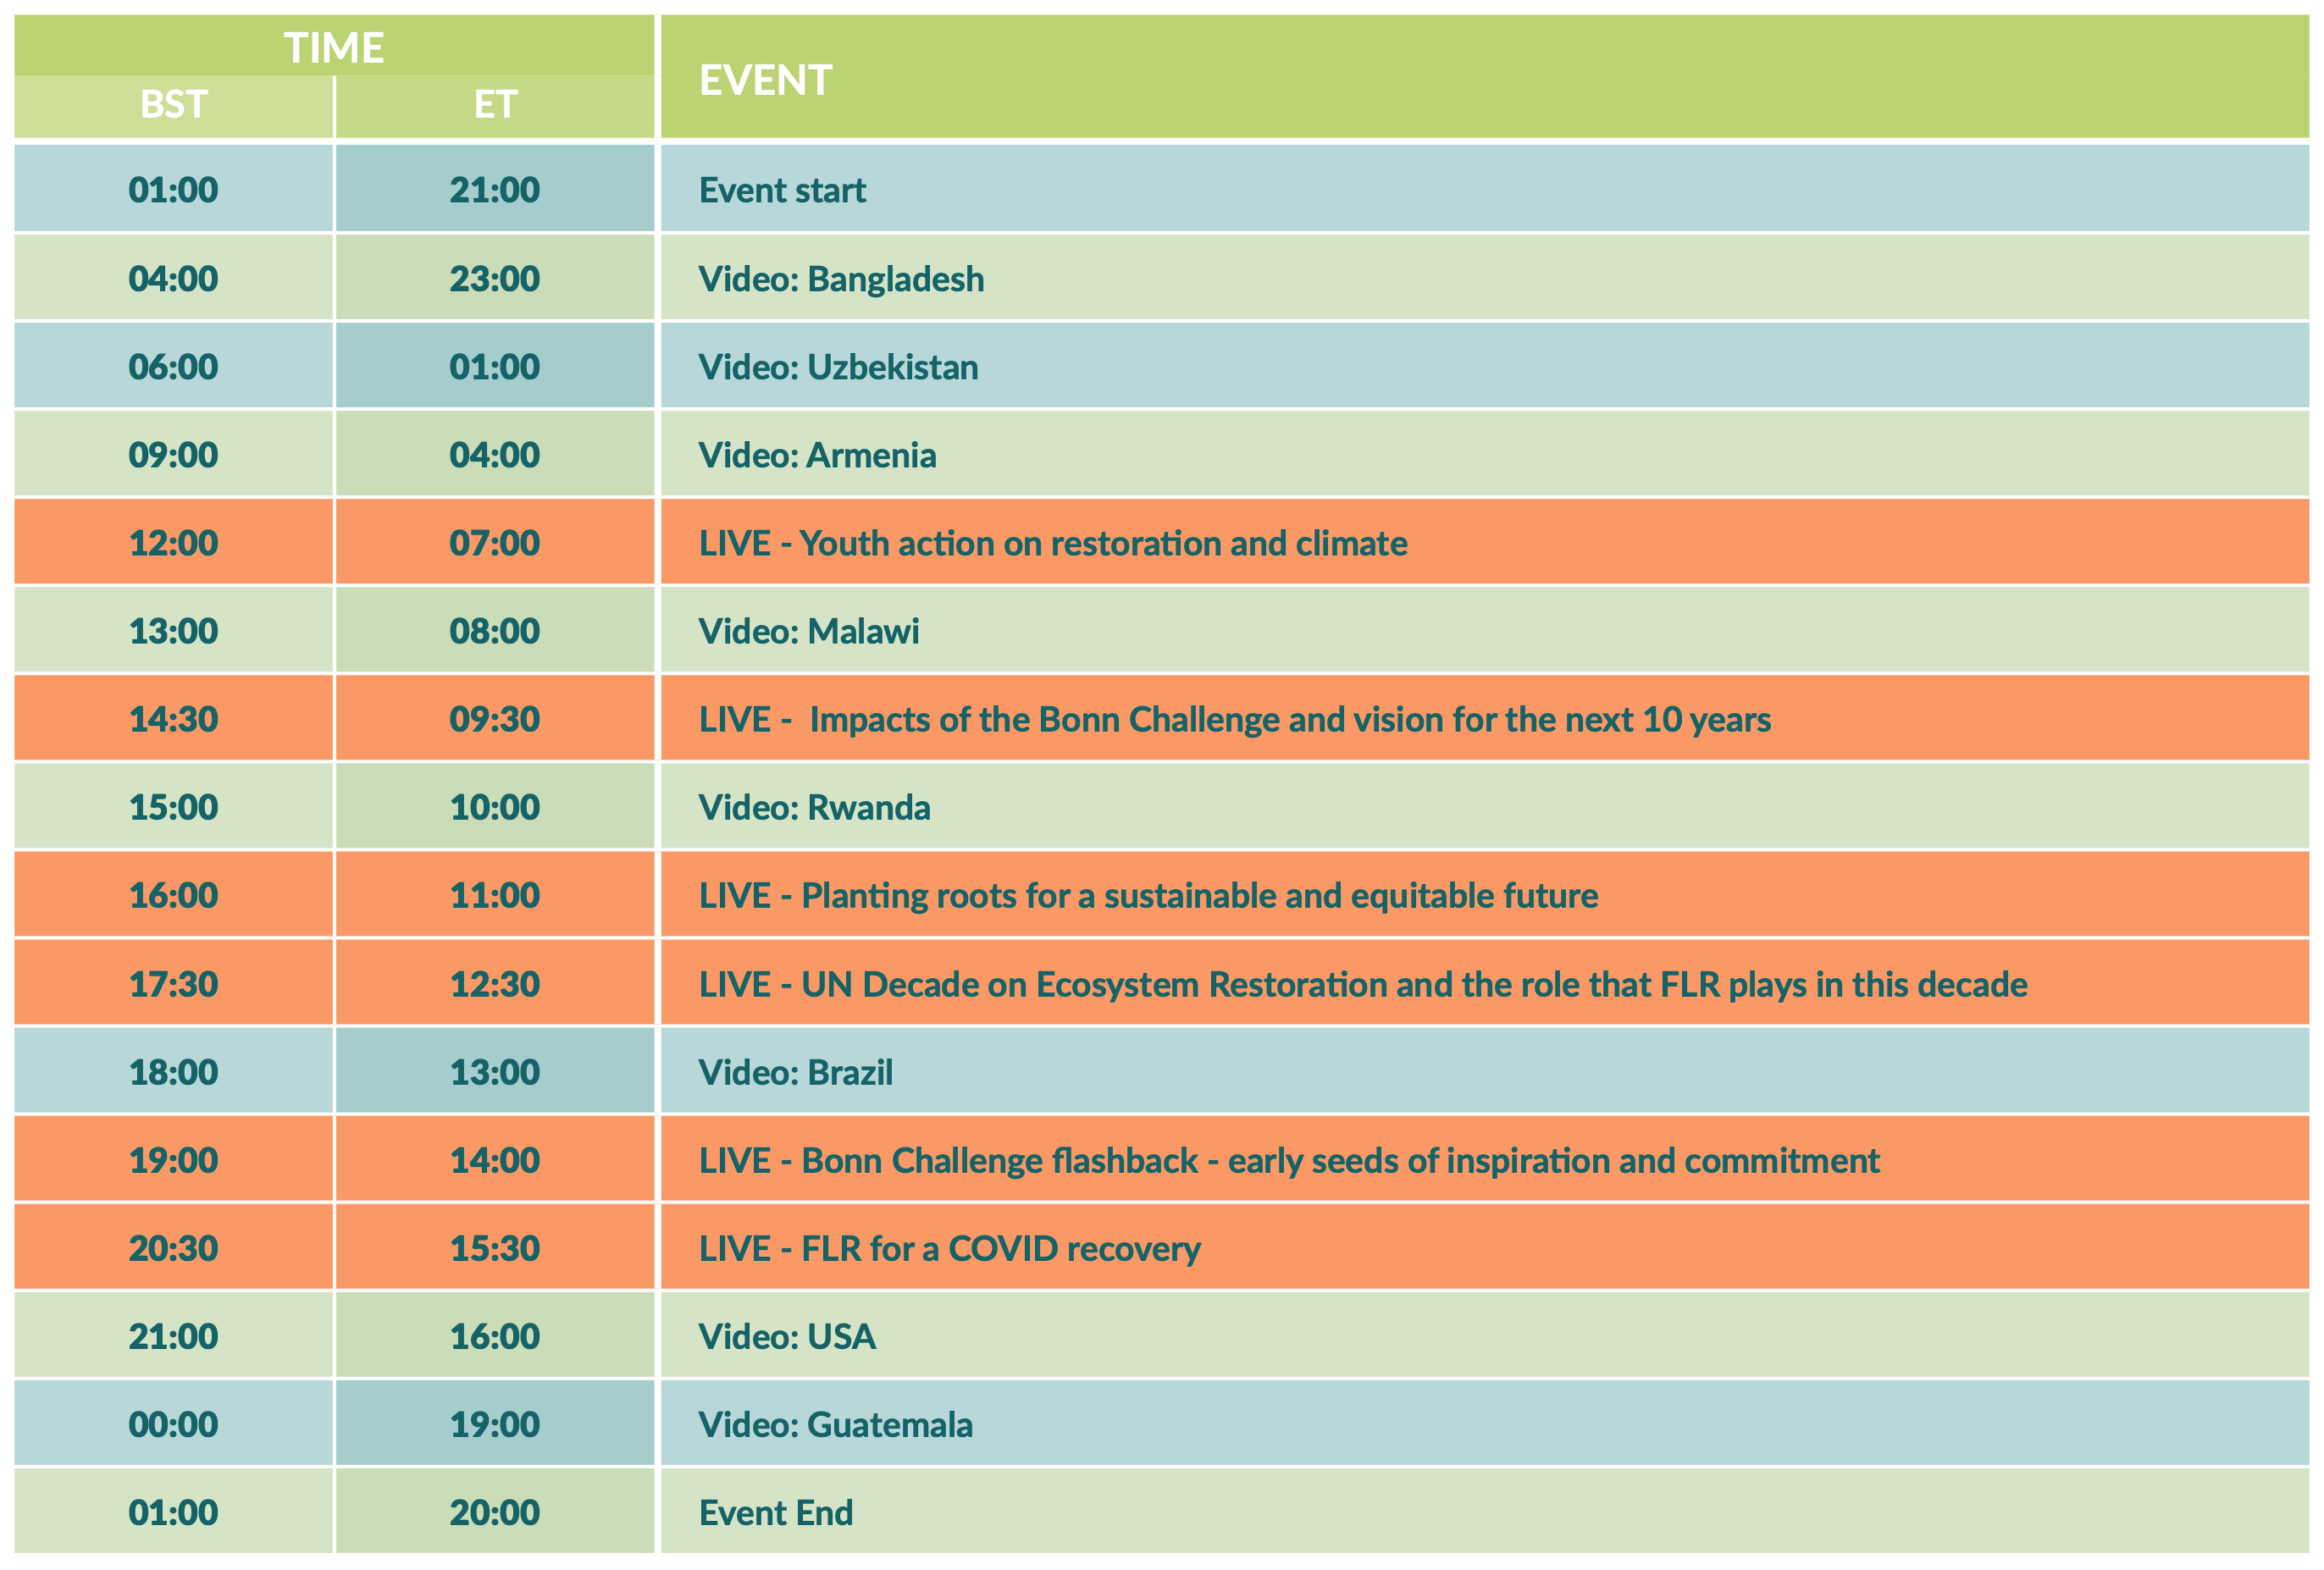 This is an image with the schedule of activities. 